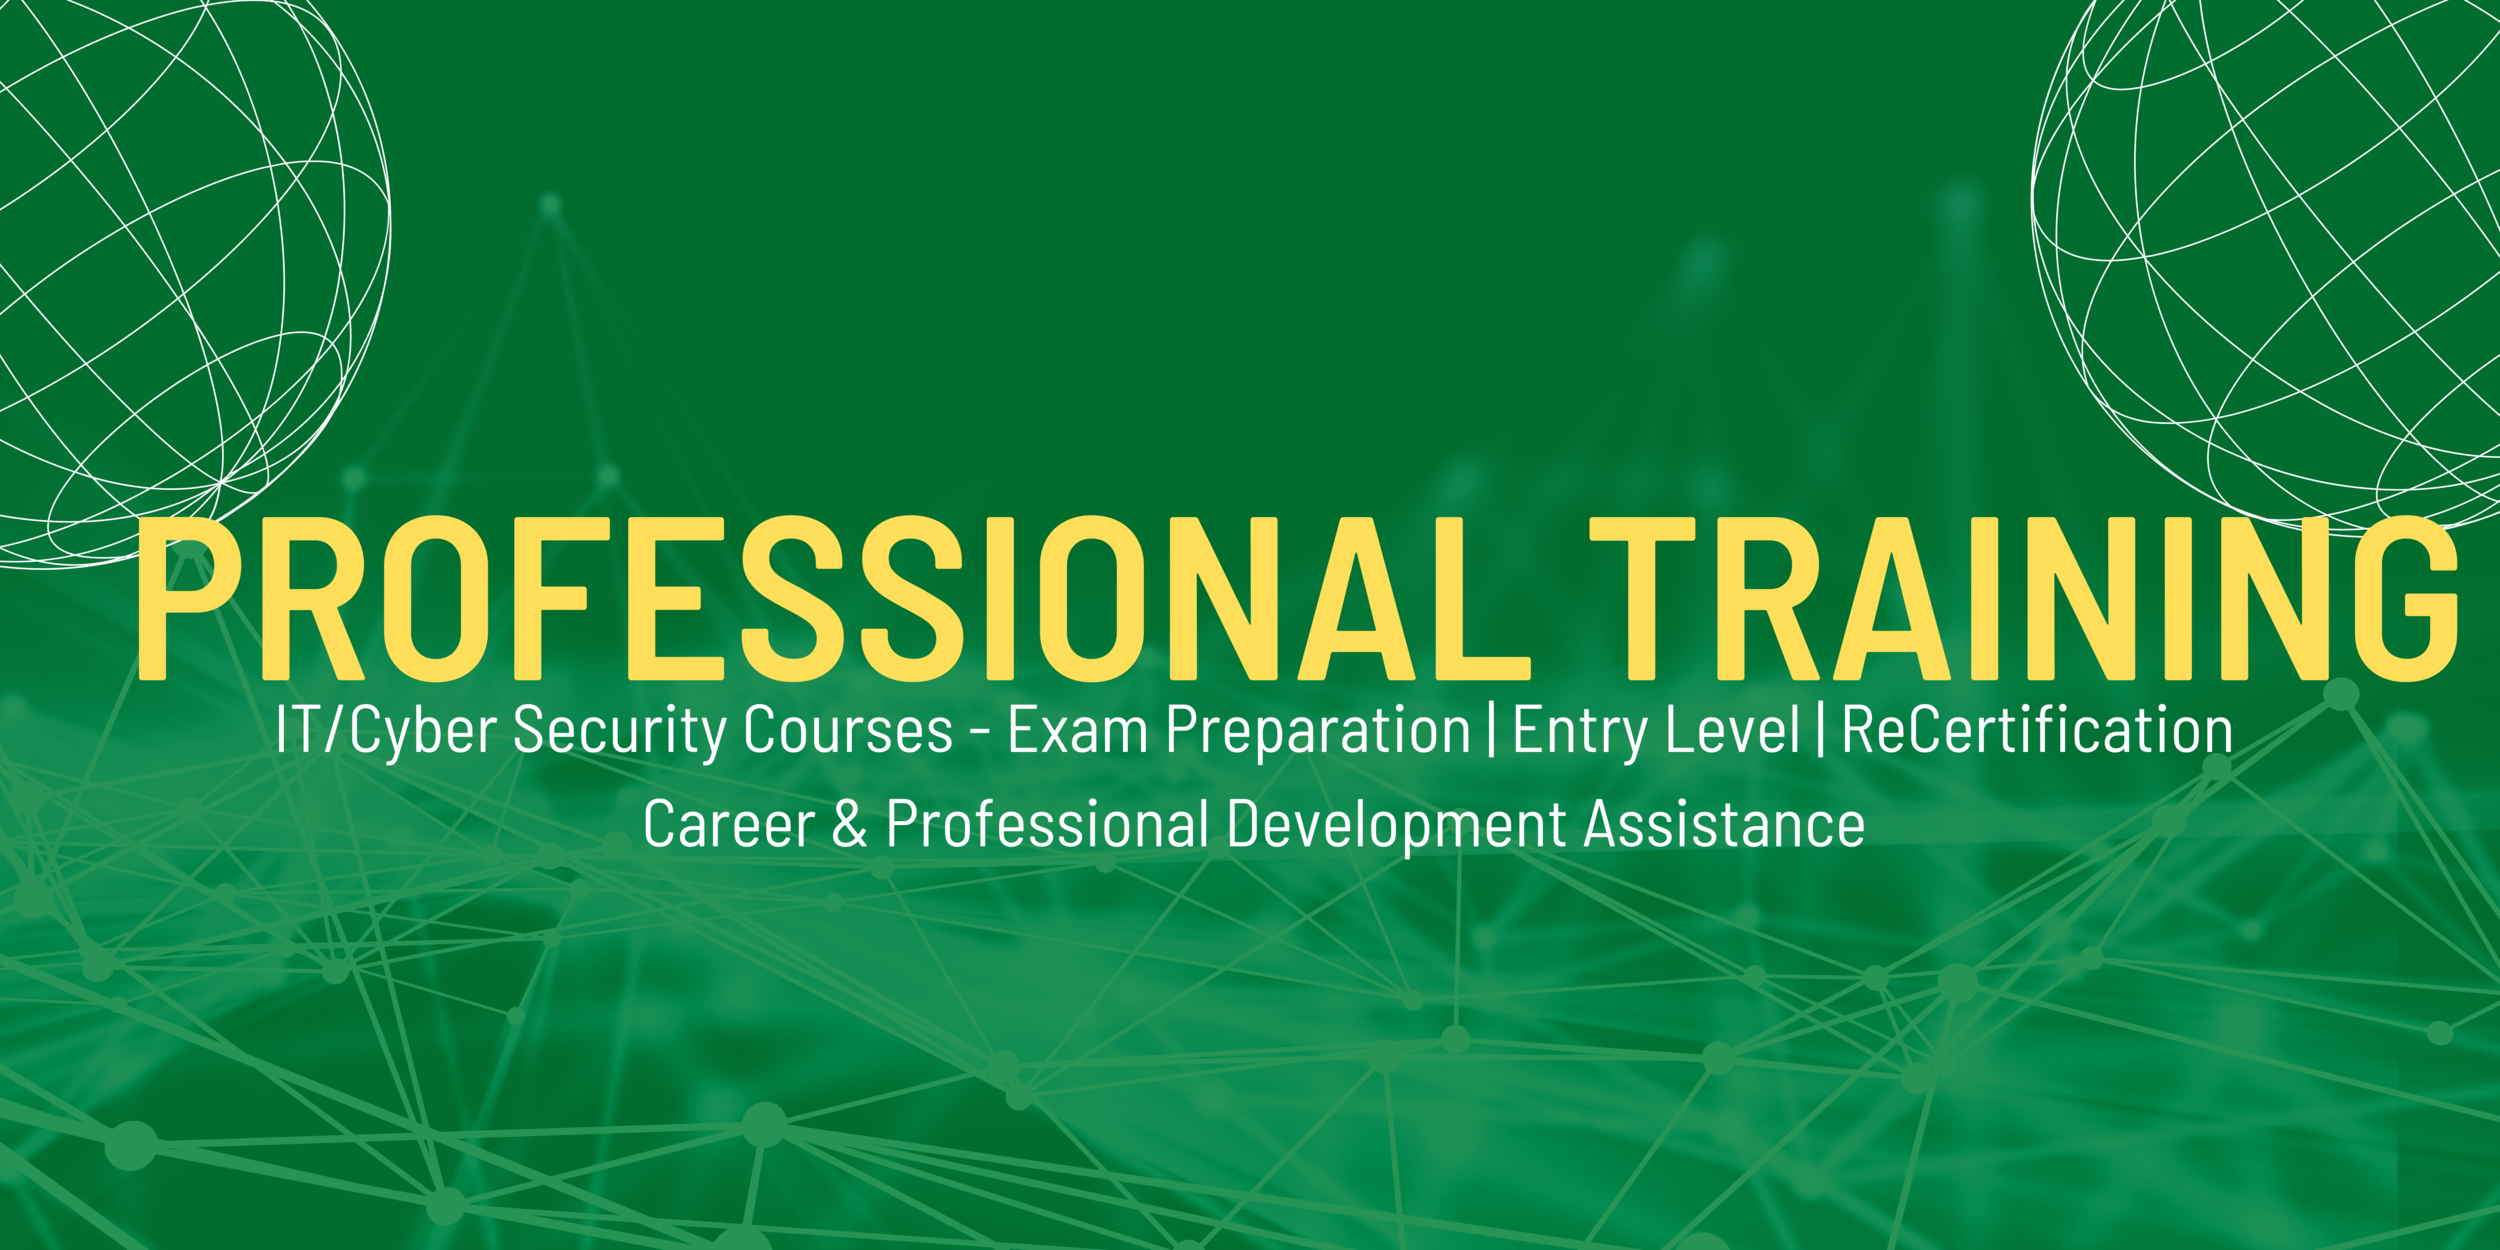  Based on our strong foundation and rich experience as a provider of IT security services, Global Networks Inc has developed the Technology Training Center: Professional Training to provide industry-leading information technology and cyber security t